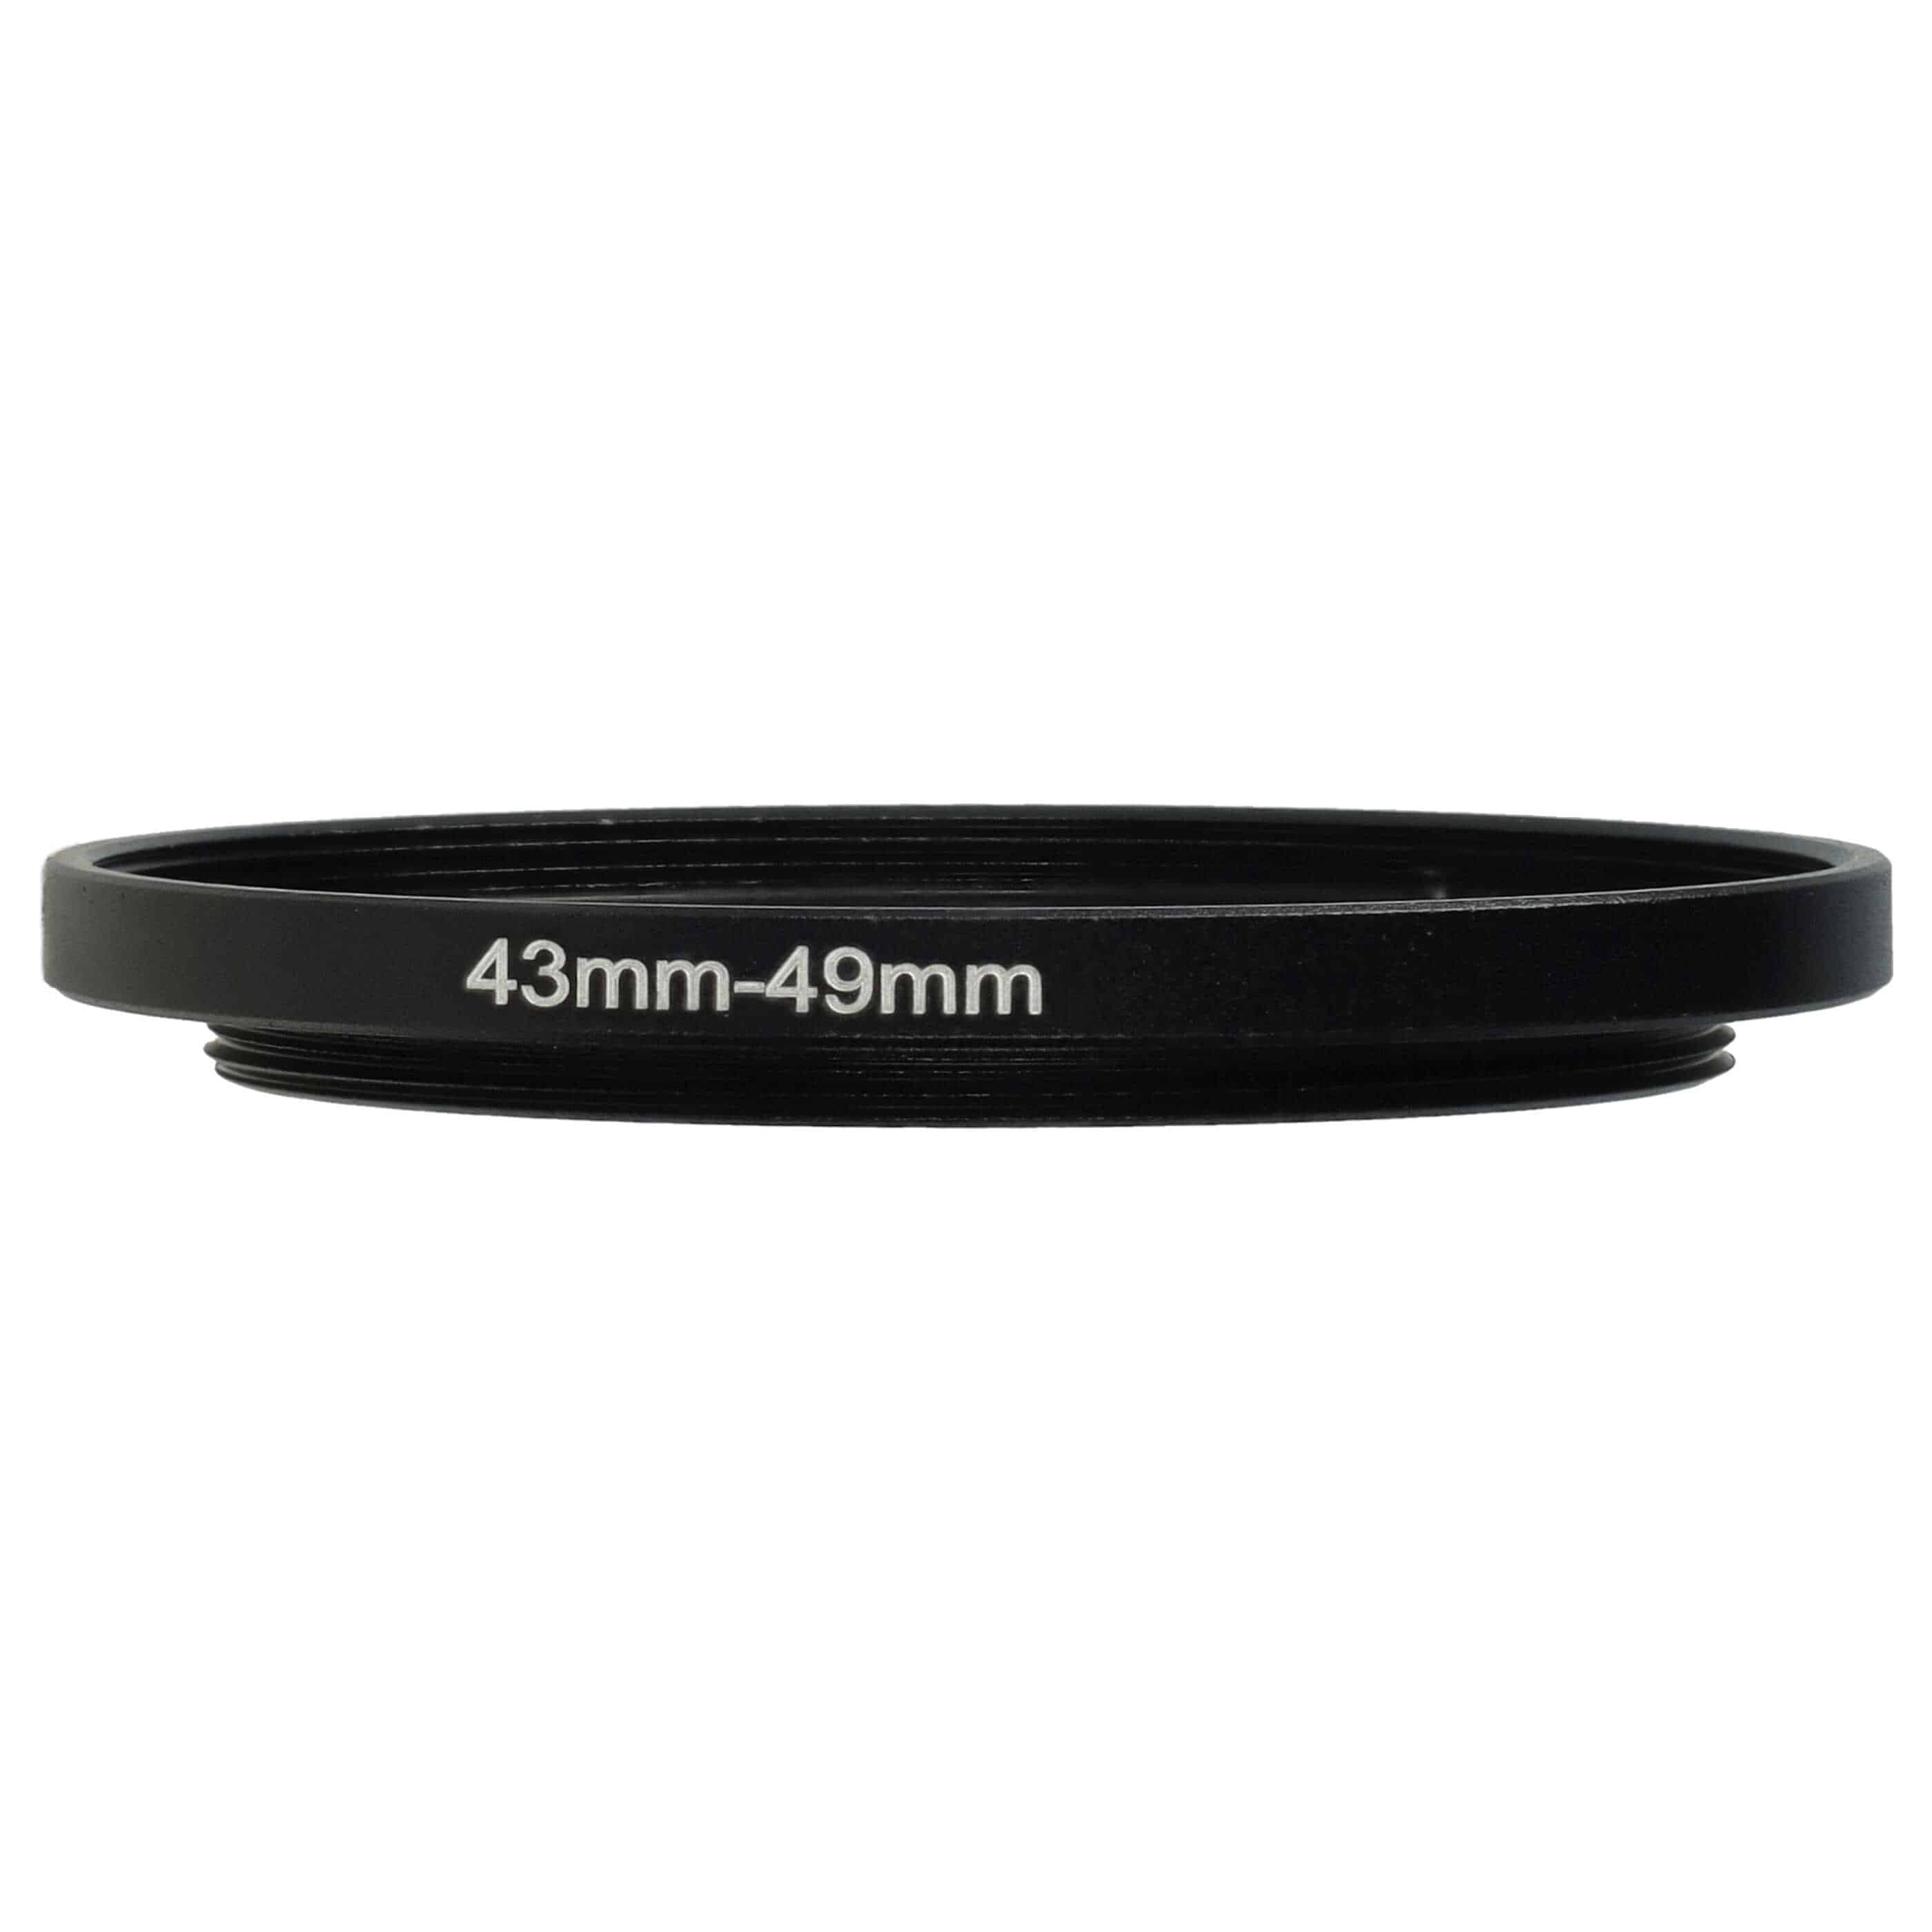 Step-Up Ring Adapter of 43 mm to 49 mmfor various Camera Lens - Filter Adapter